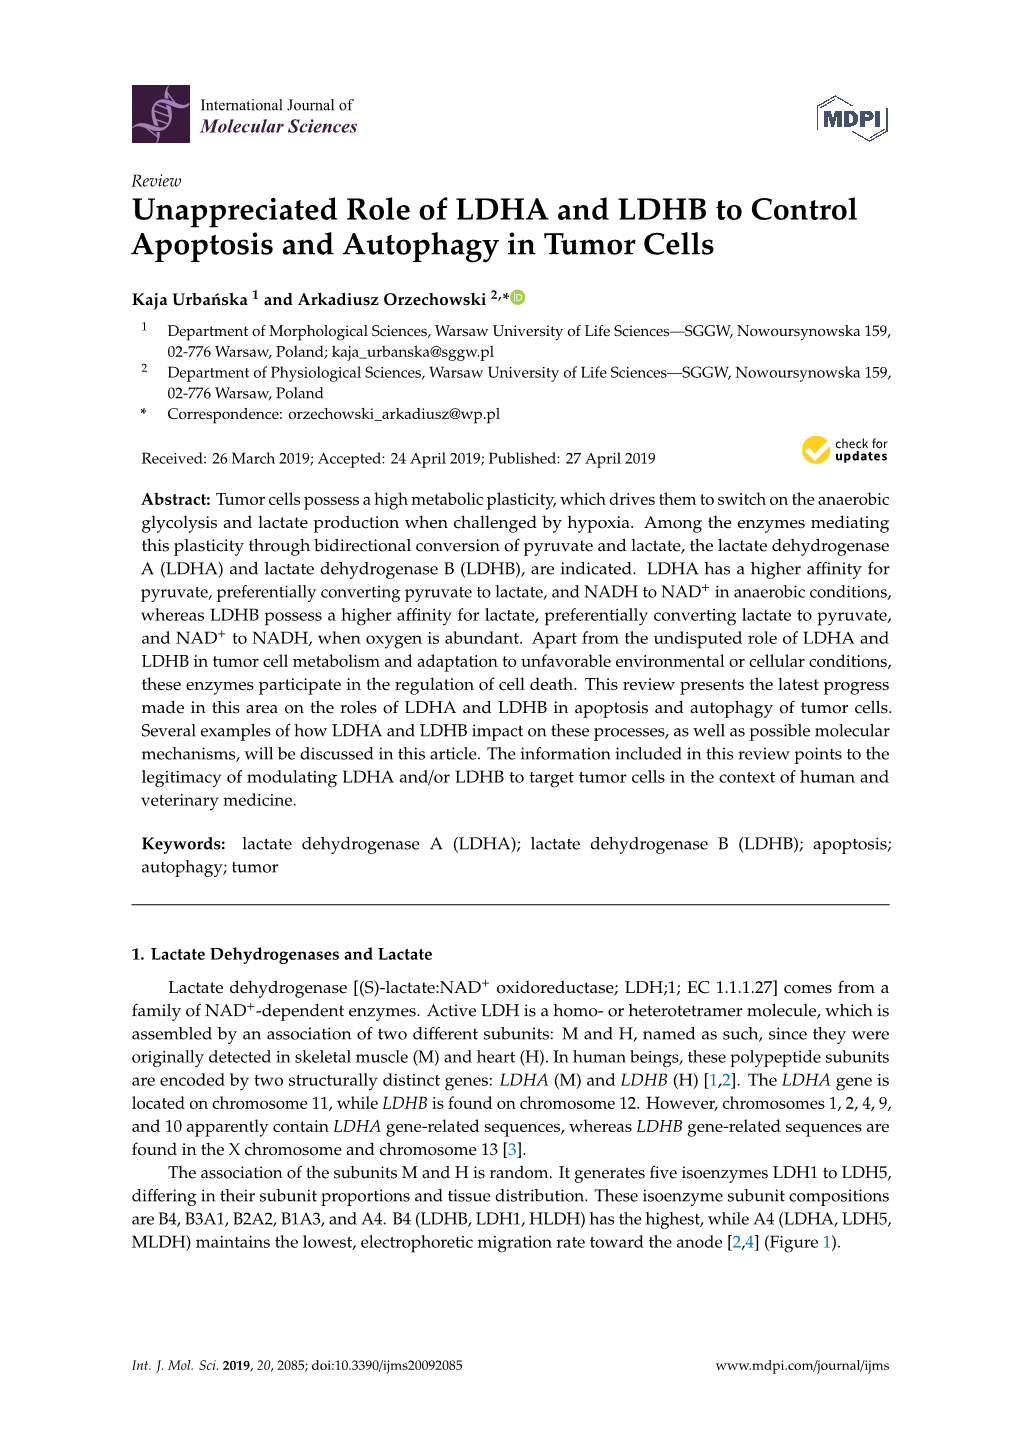 Unappreciated Role of LDHA and LDHB to Control Apoptosis and Autophagy in Tumor Cells